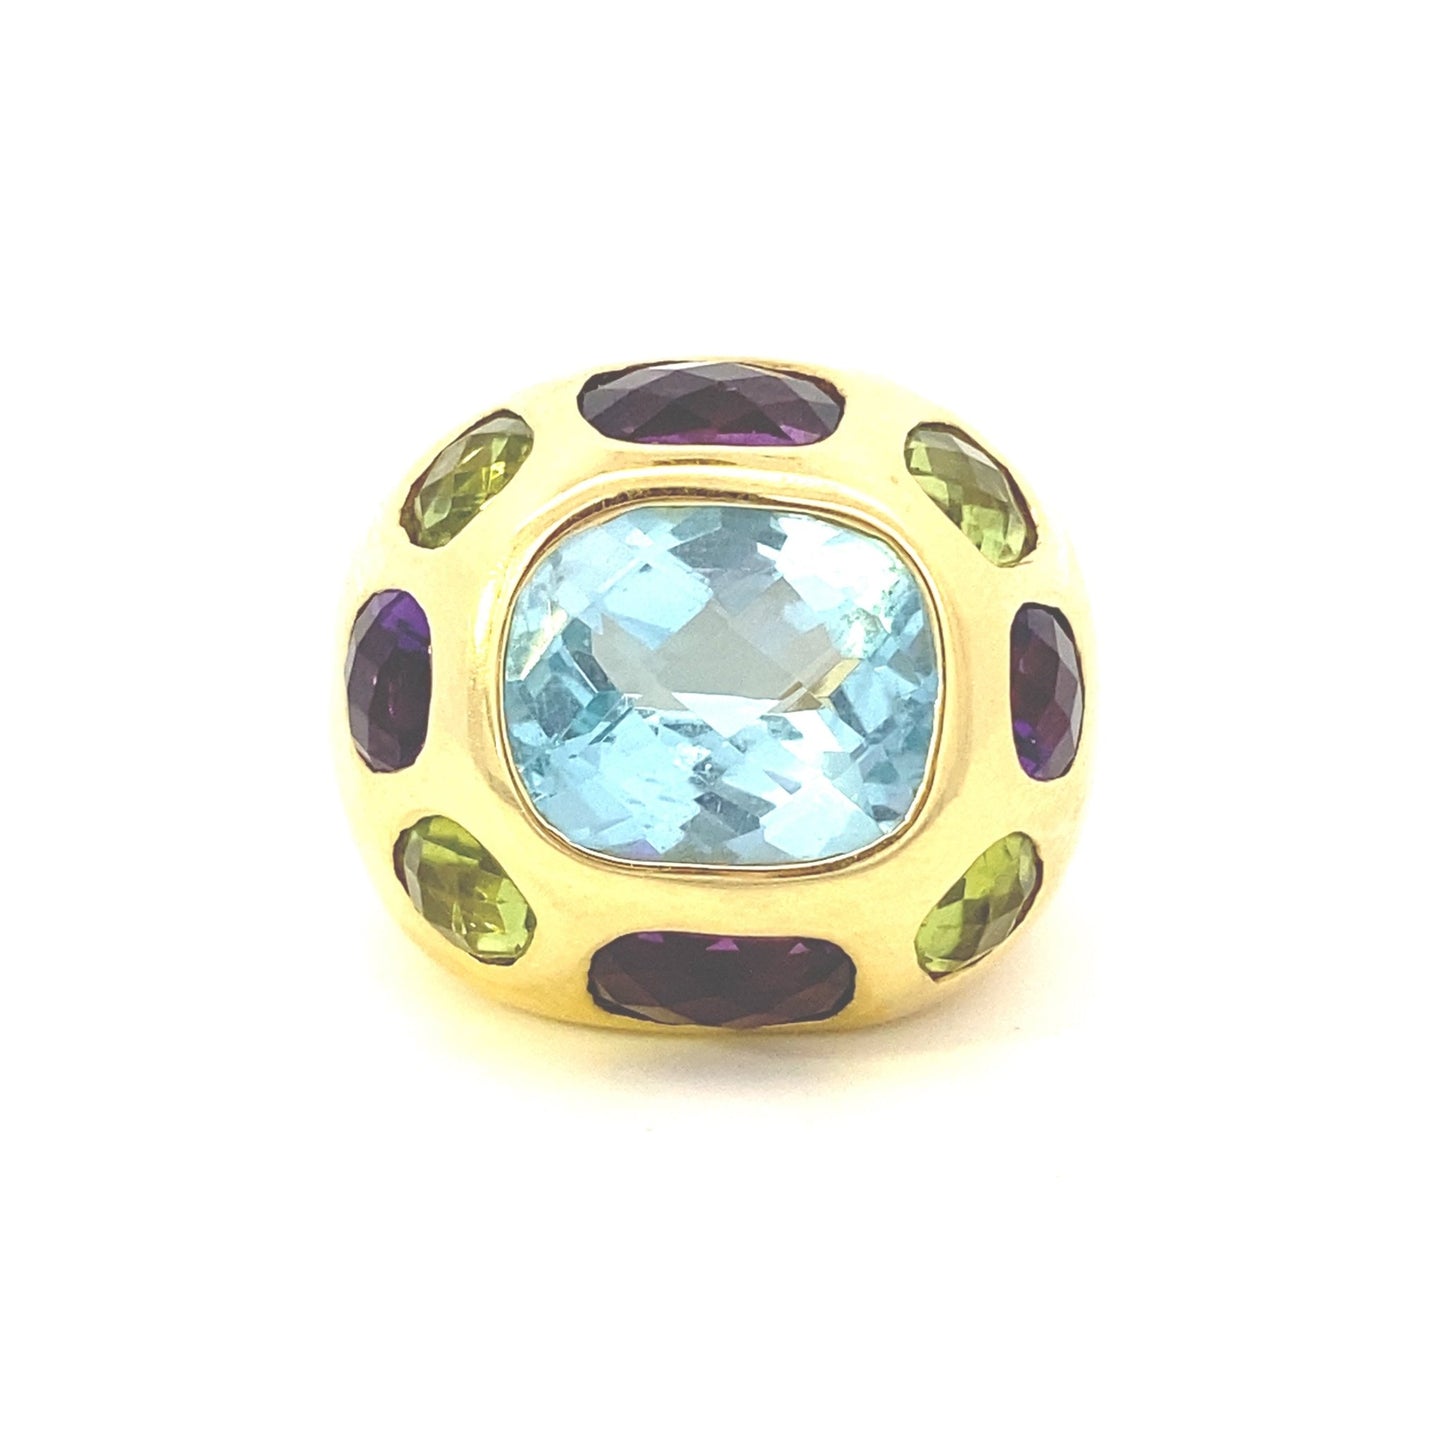 Ring multi-color, large dome 18k yg with amethyst, peridot, & blue topaz - Gaines Jewelers